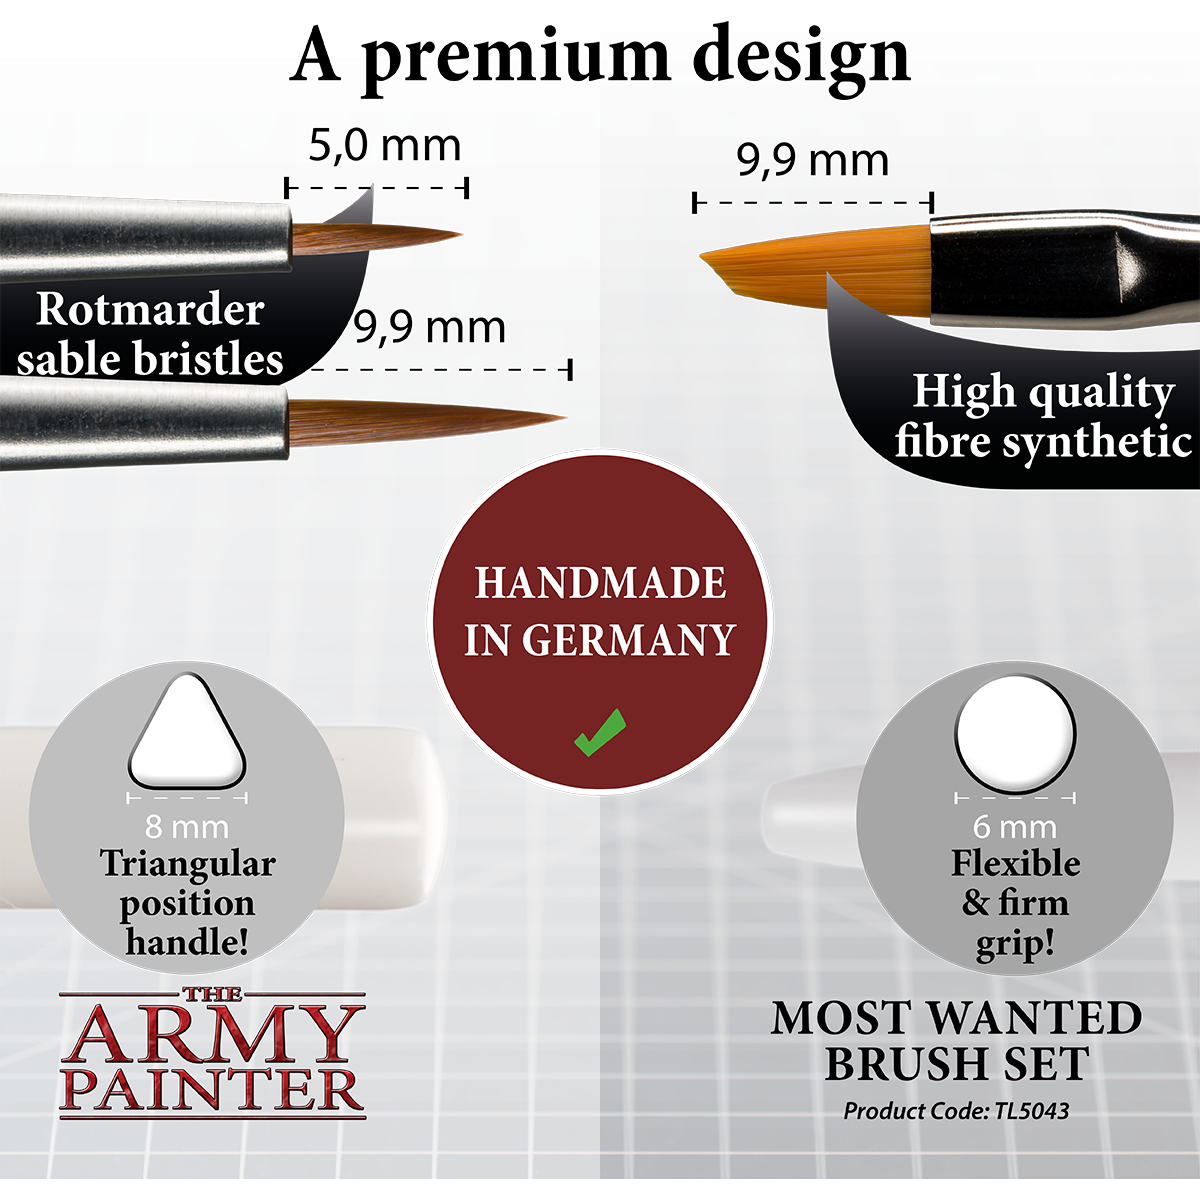 The Army Painter - Most Wanted Brush Set